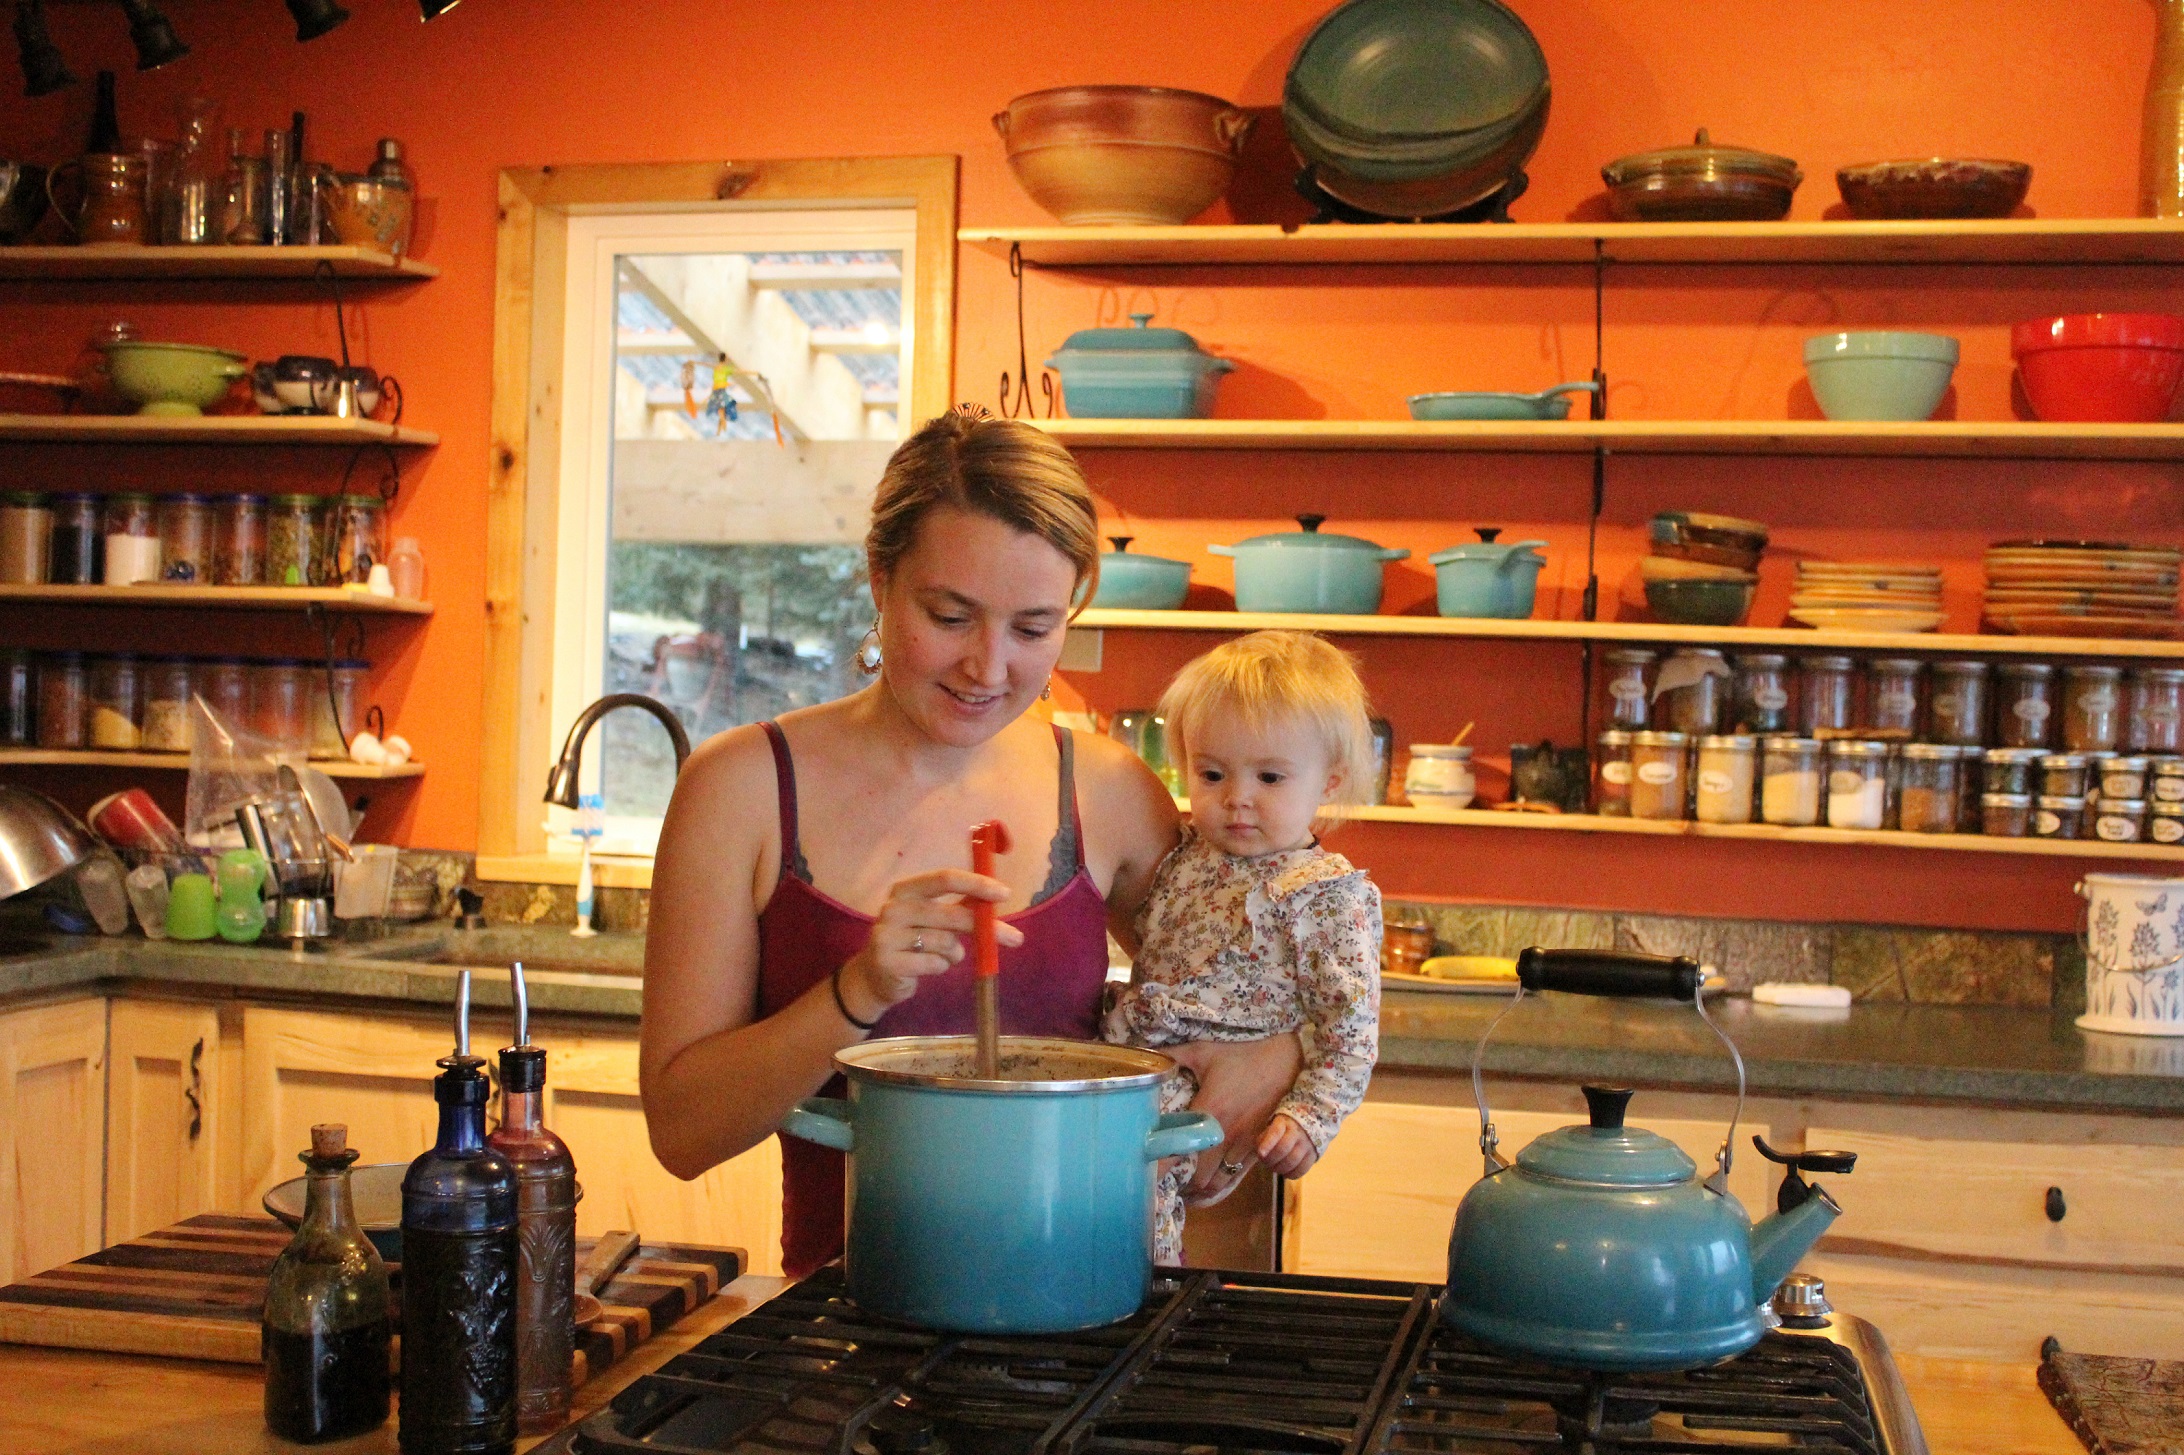 Eve Kilcher stirs a pot of chicken soup while holding Sparrow. The Kilcher's kitchen, which is the backdrop of the cover photo on Homestead Kitchen, was under construction for the majority of the time the Kilchers worked on the cookbook.-Photo by Anna Frost, Homer News